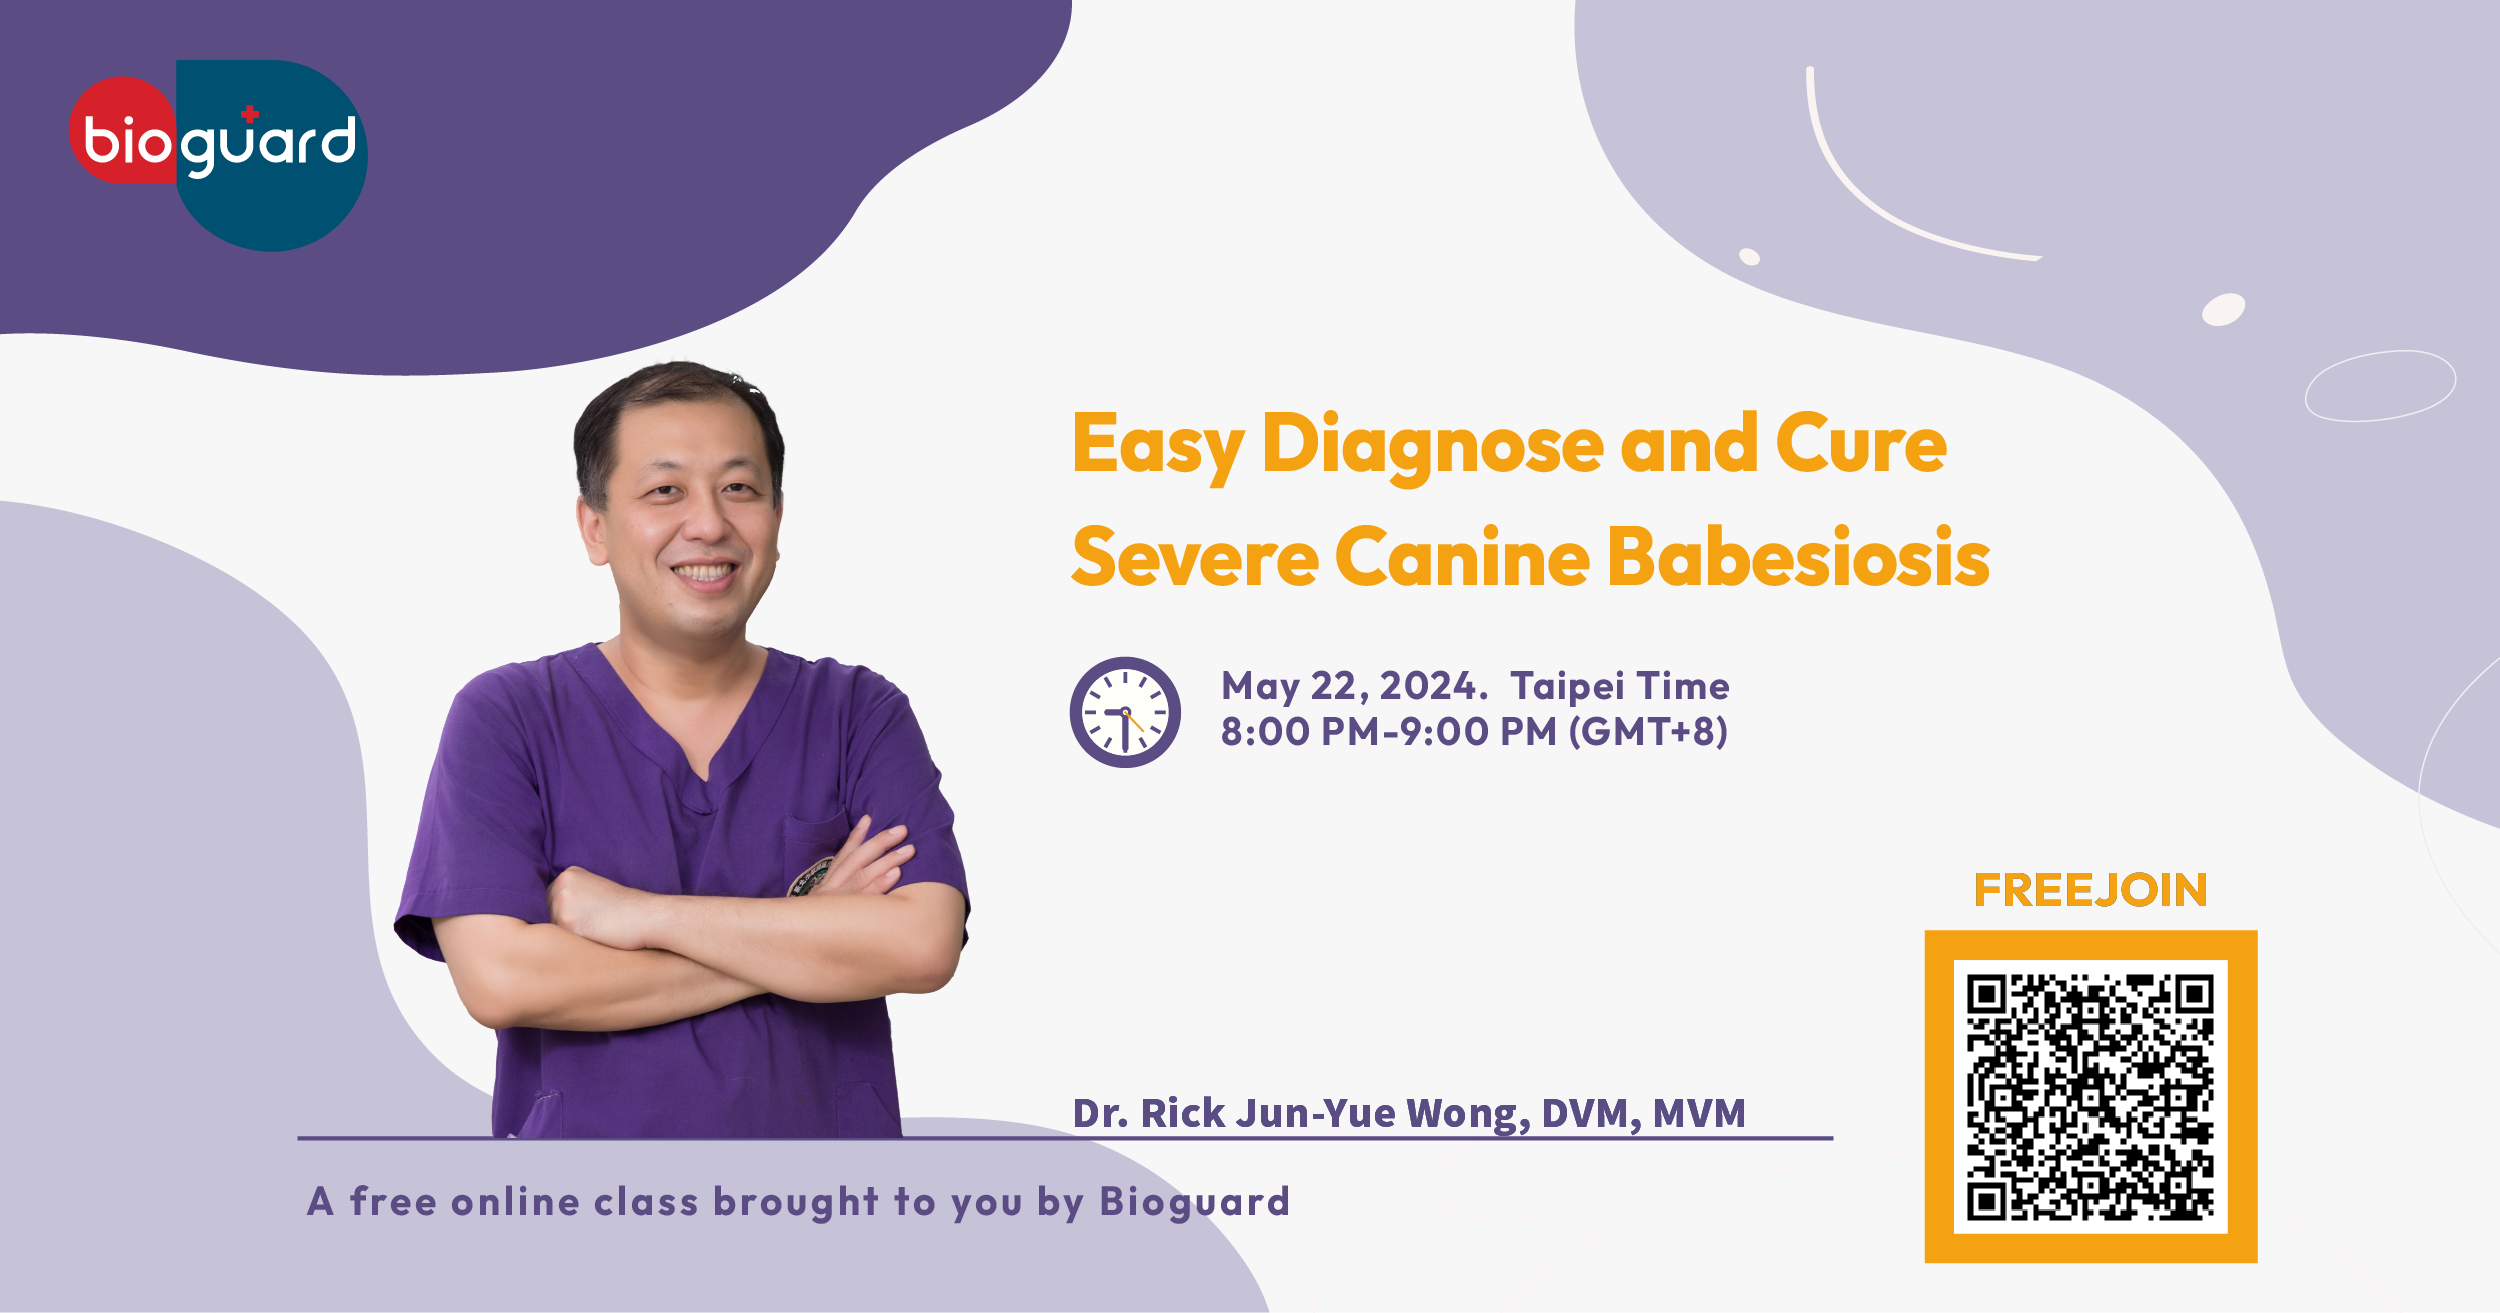 Easy Diagnose and Cure Severe Canine Babesiosis